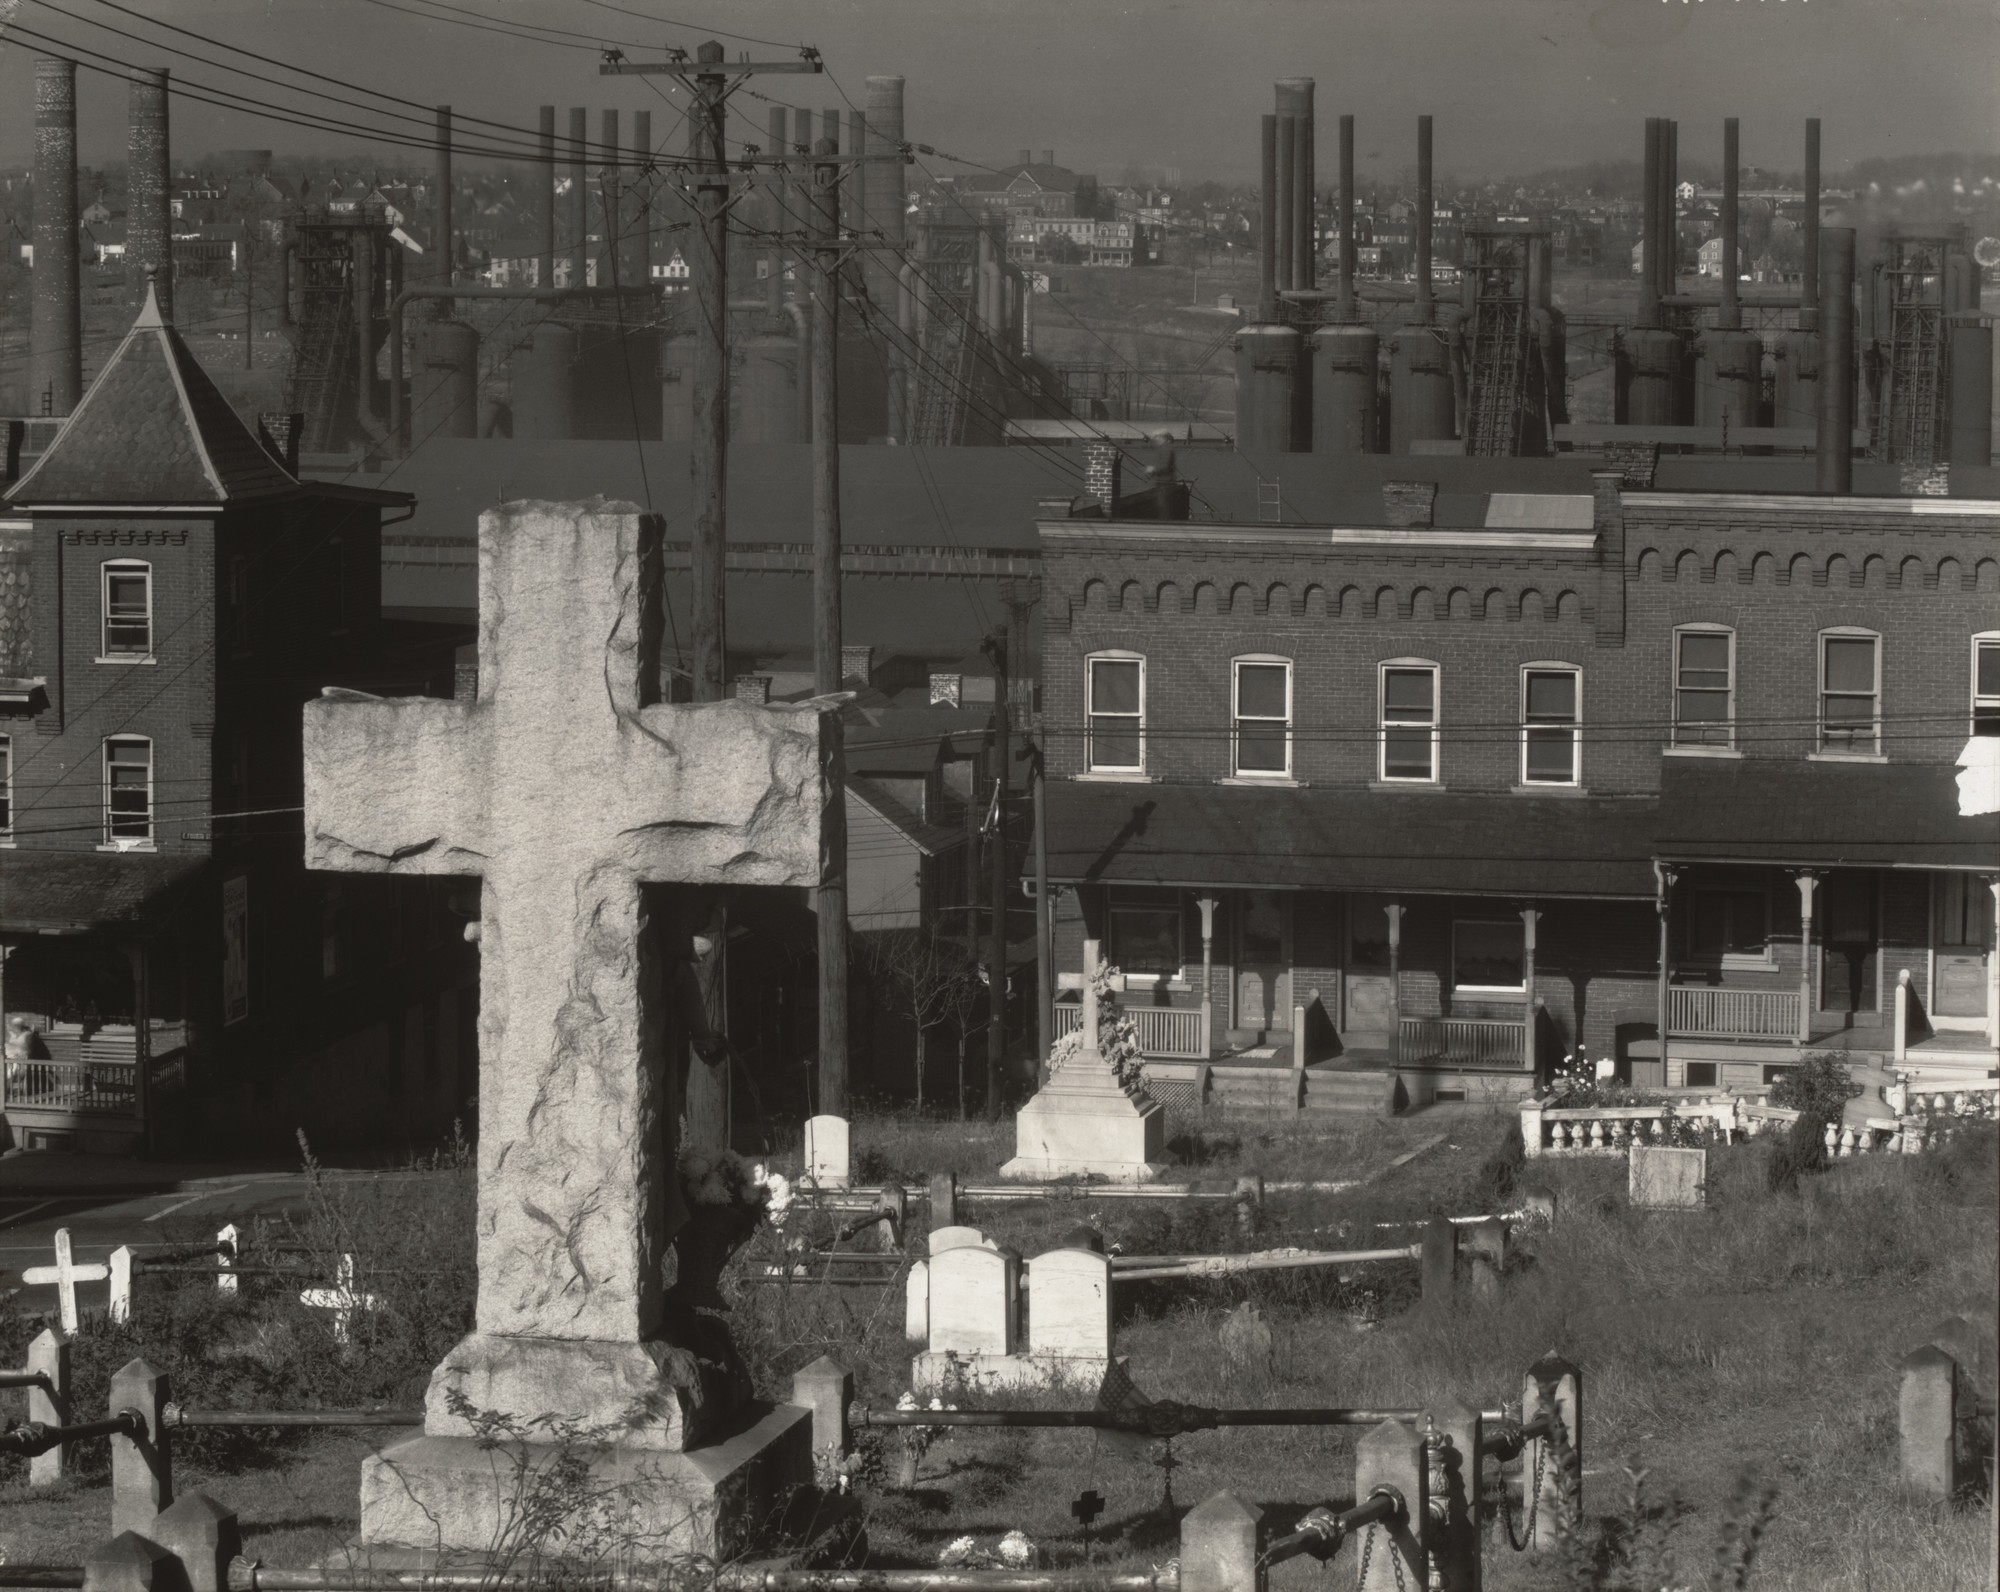 A Graveyard and Steel Mill in Bethlehem